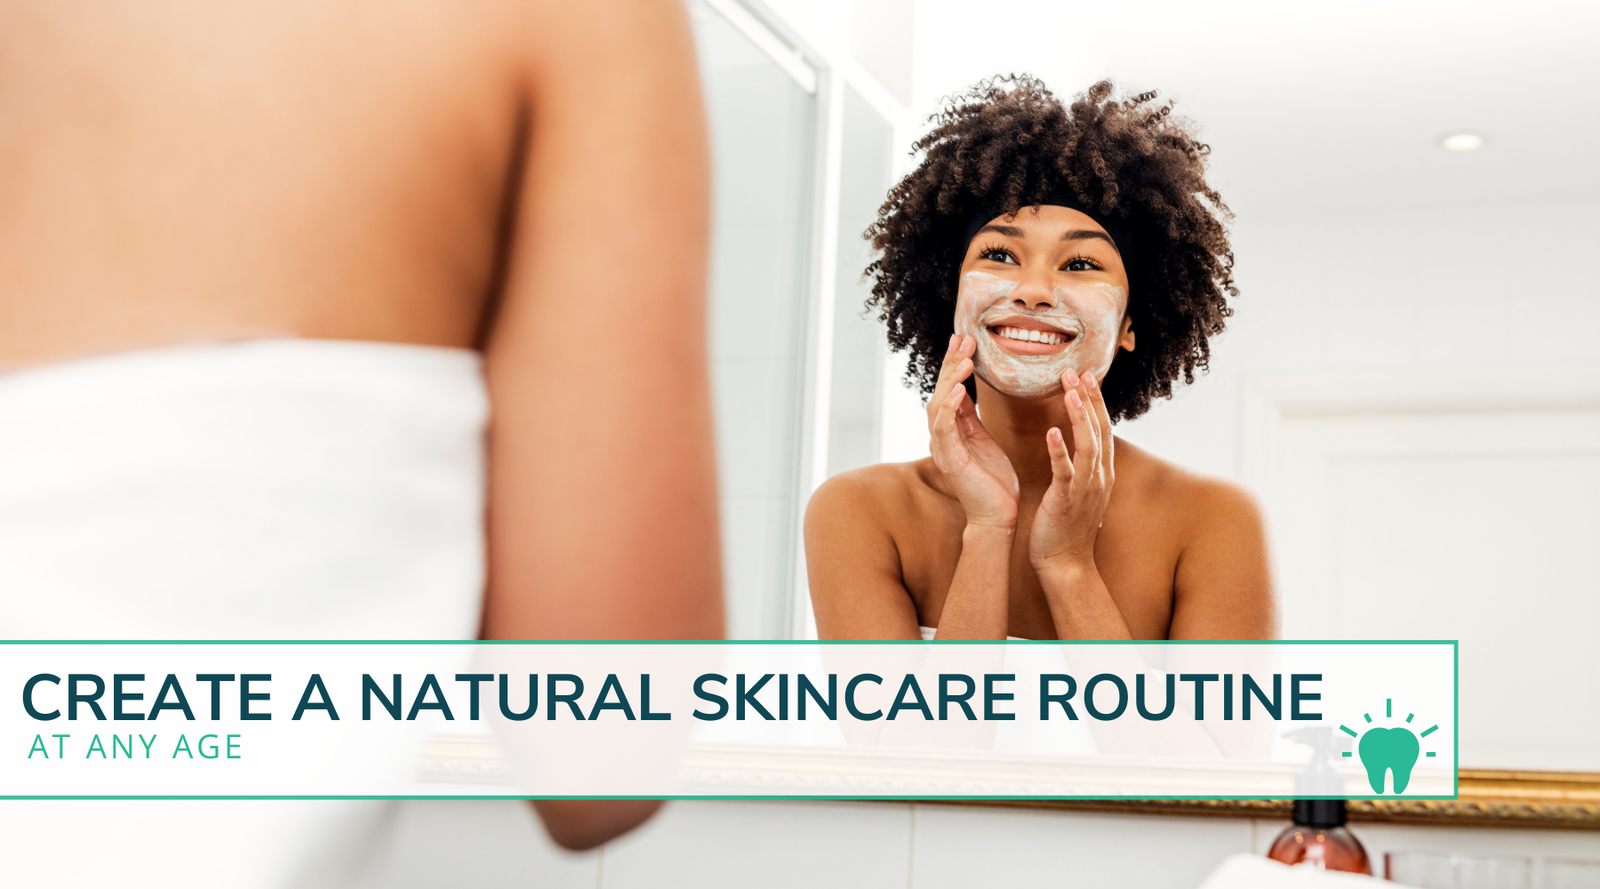 How To Create A Natural Skincare Routine At Any Age